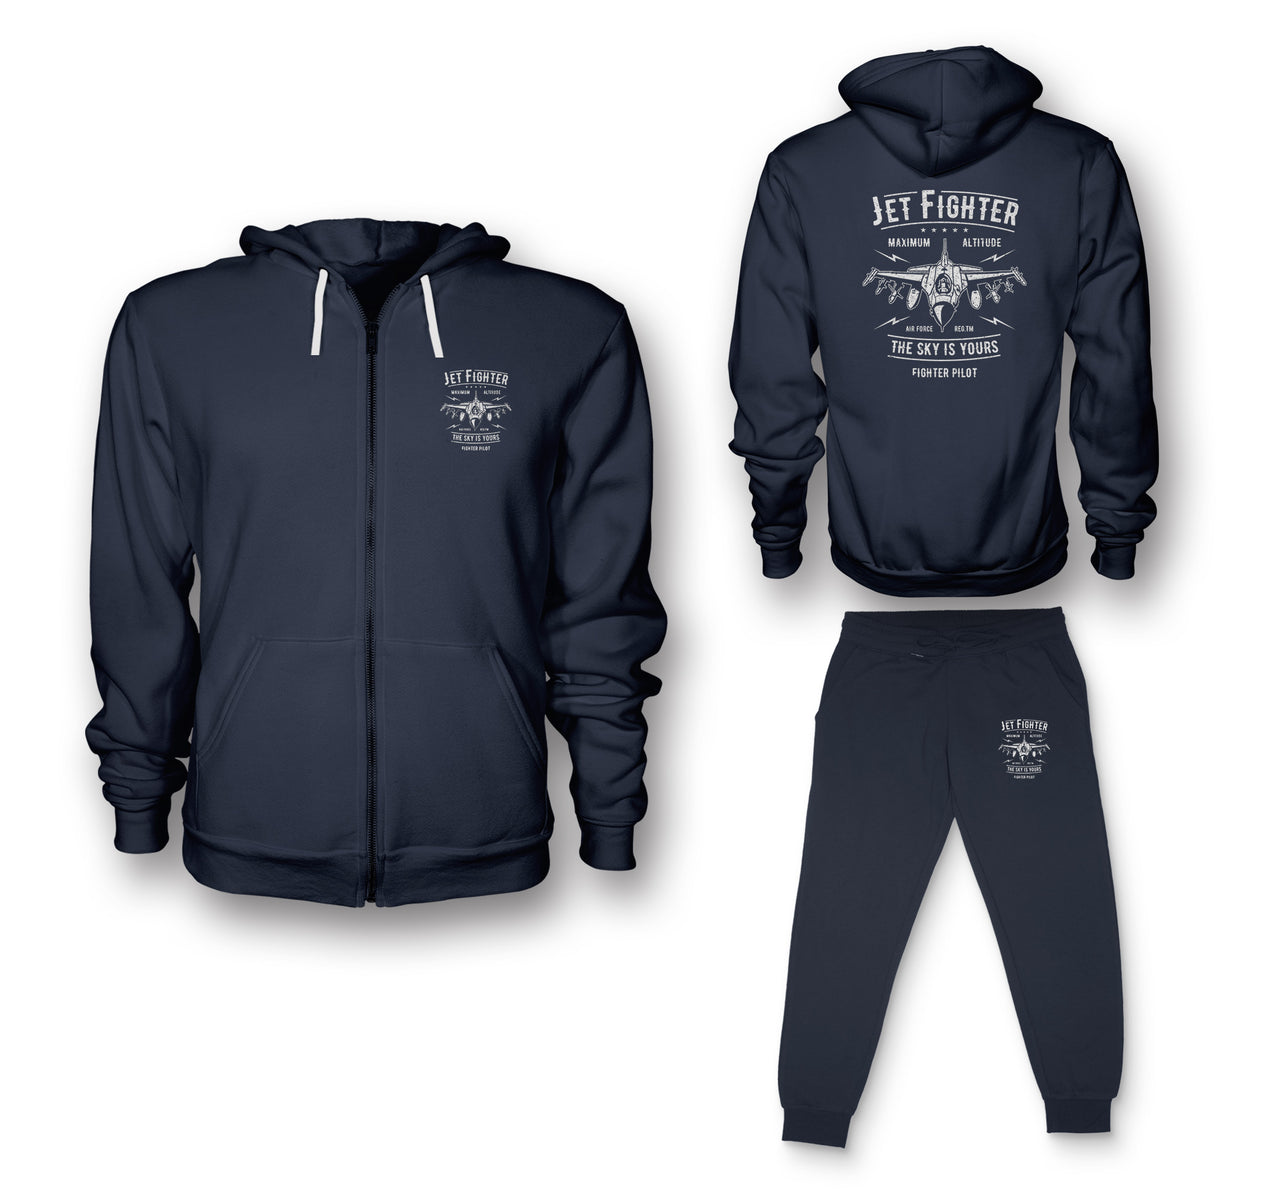 Jet Fighter - The Sky is Yours Designed Zipped Hoodies & Sweatpants Set